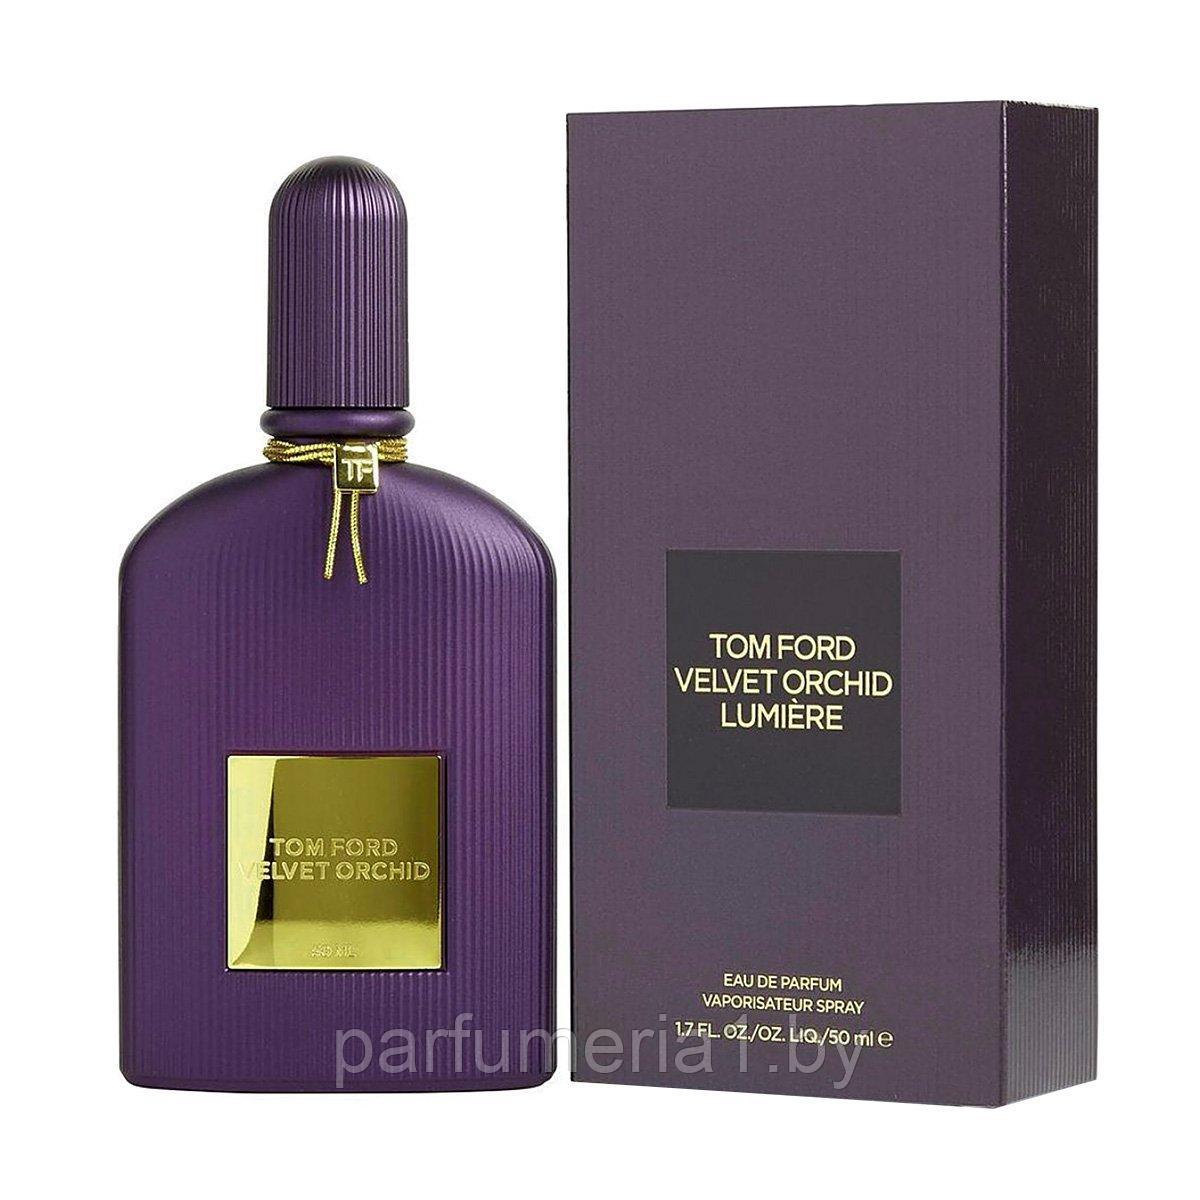 Tom Ford Velvet Orchid Lumière - фото 1 - id-p130598055